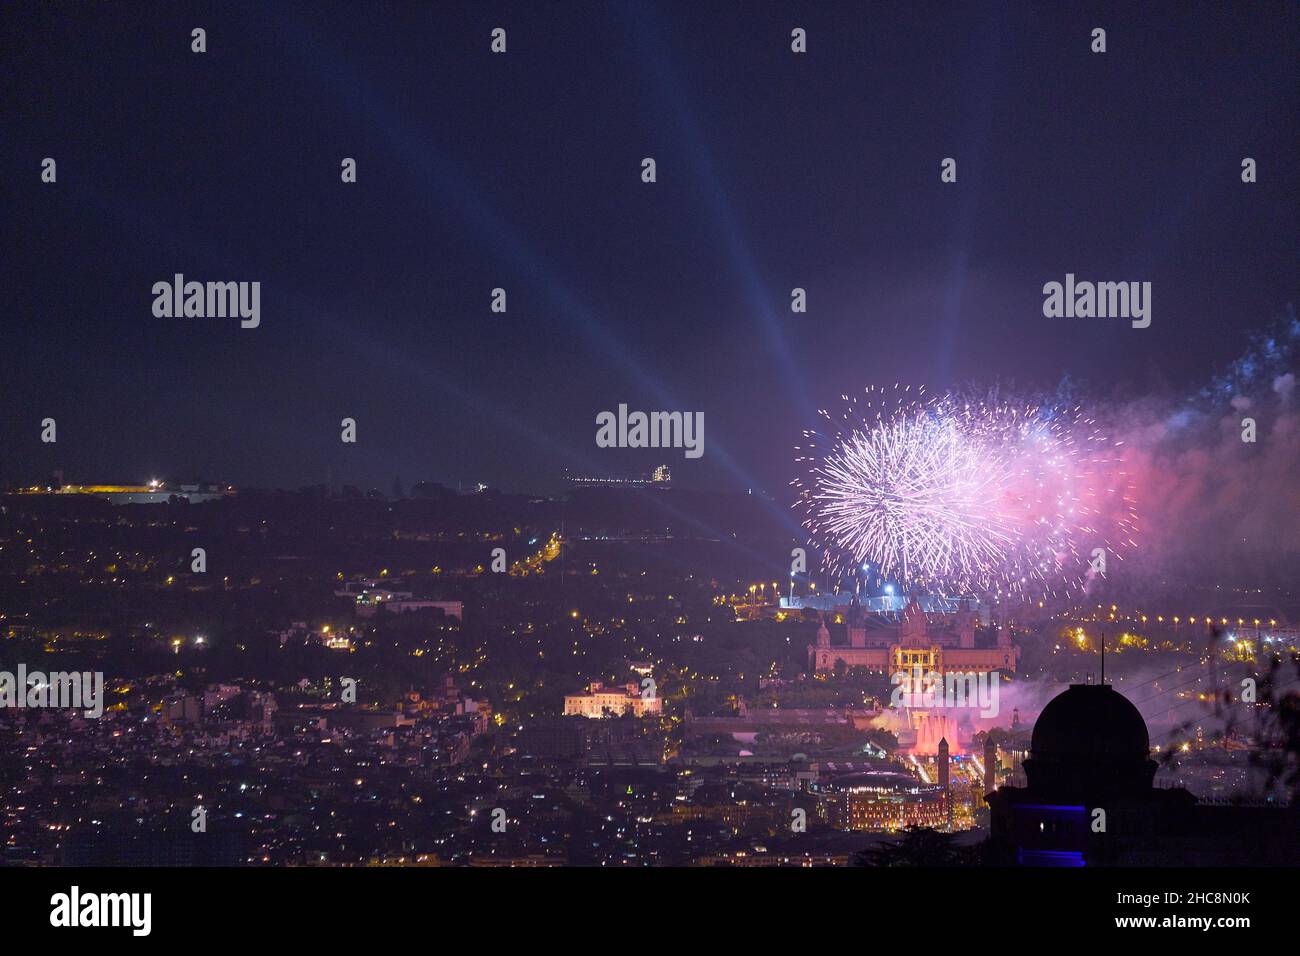 Fireworks night in the city of Barcelona, Spain Stock Photo